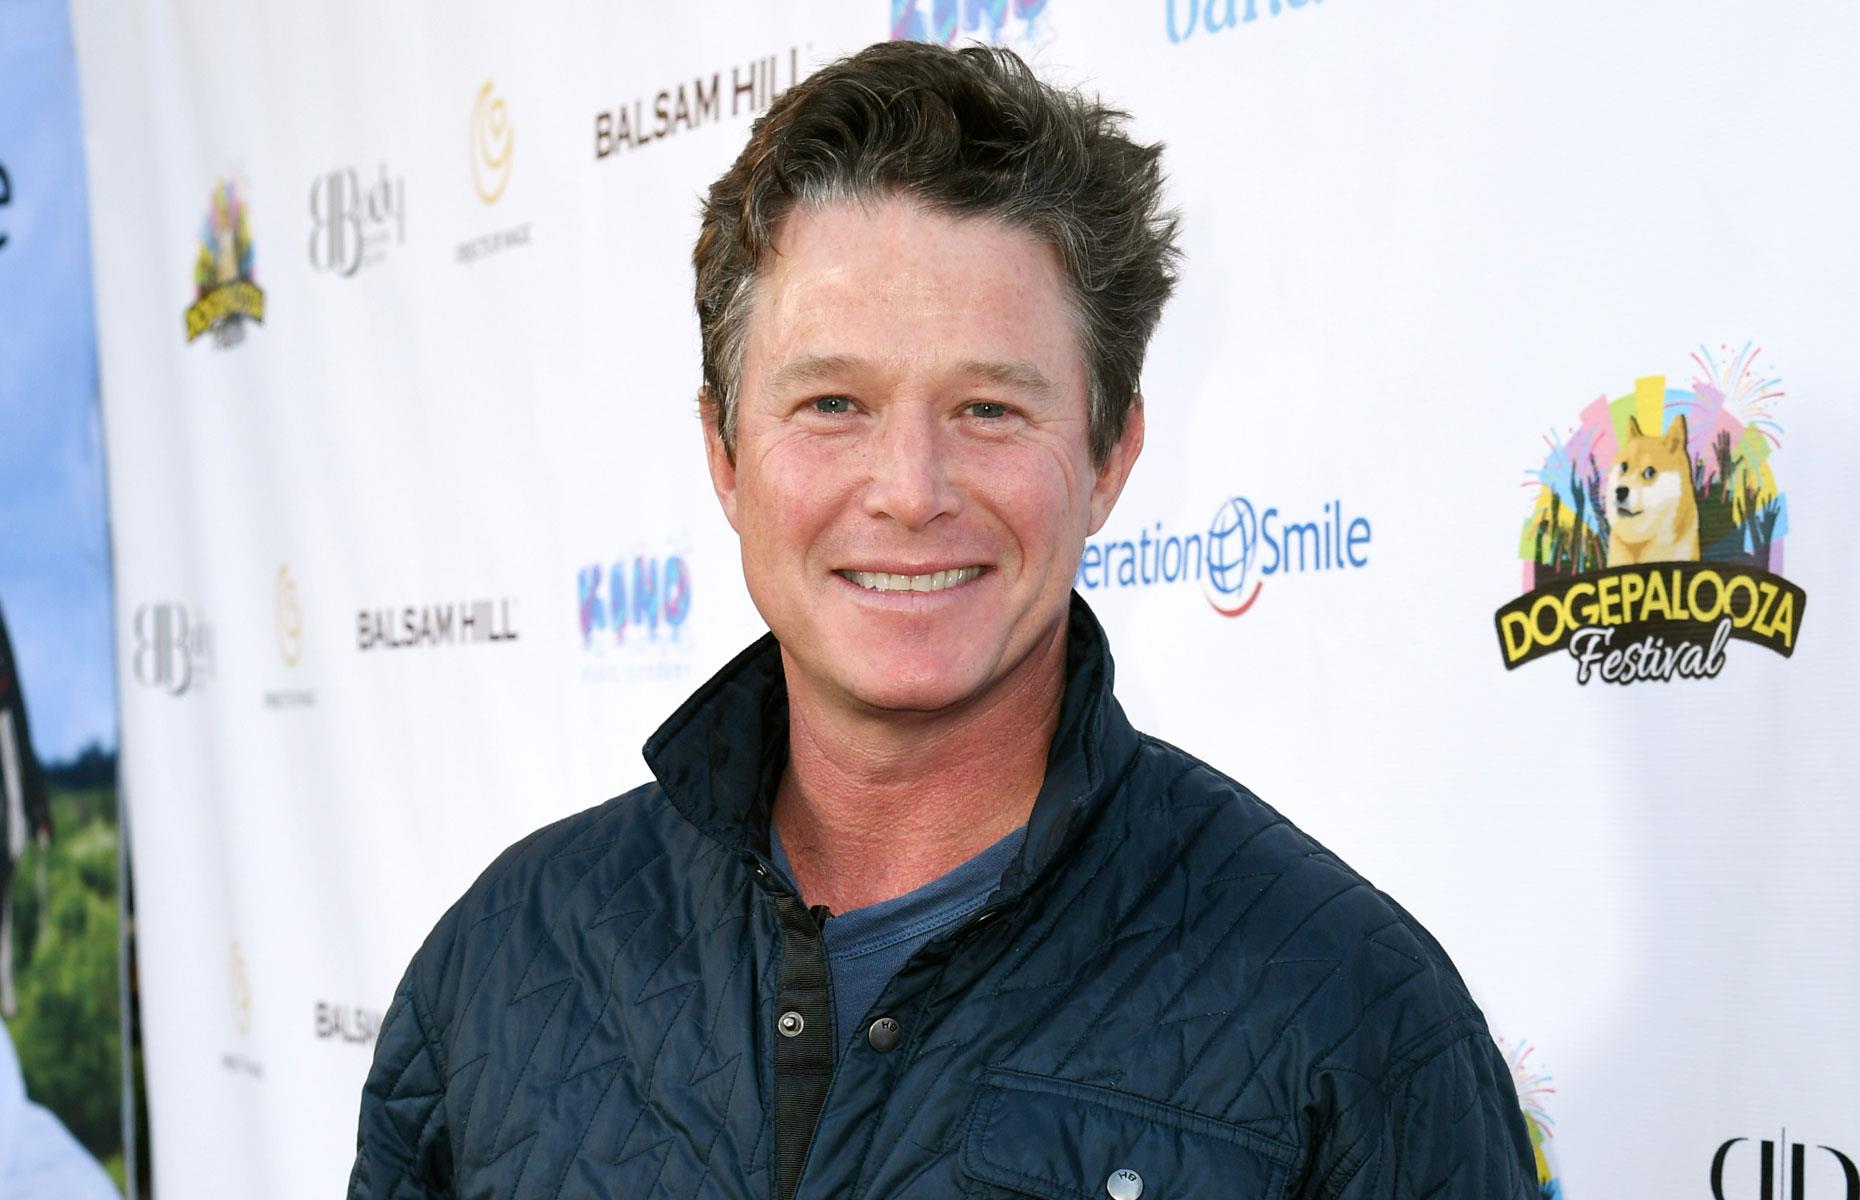 <p>Jonathan's younger brother, Billy Bush, decided to pursue a career in entertainment.</p>  <p>After cutting his chops on radio in the 1990s, Billy moved into TV, getting his big break in 2001 when he joined <em>Access Hollywood</em> as East Coast correspondent. He was promoted to <em>Access Hollywood</em> co-host in 2004.</p>  <p>After juggling the role with his eponymous radio show, as well as co-hosting events like <em>Miss USA </em>and <em>Miss Universe</em>, Billy quit <em>Access Hollywood </em>to join NBC's <em>Today </em>show in 2016.</p>